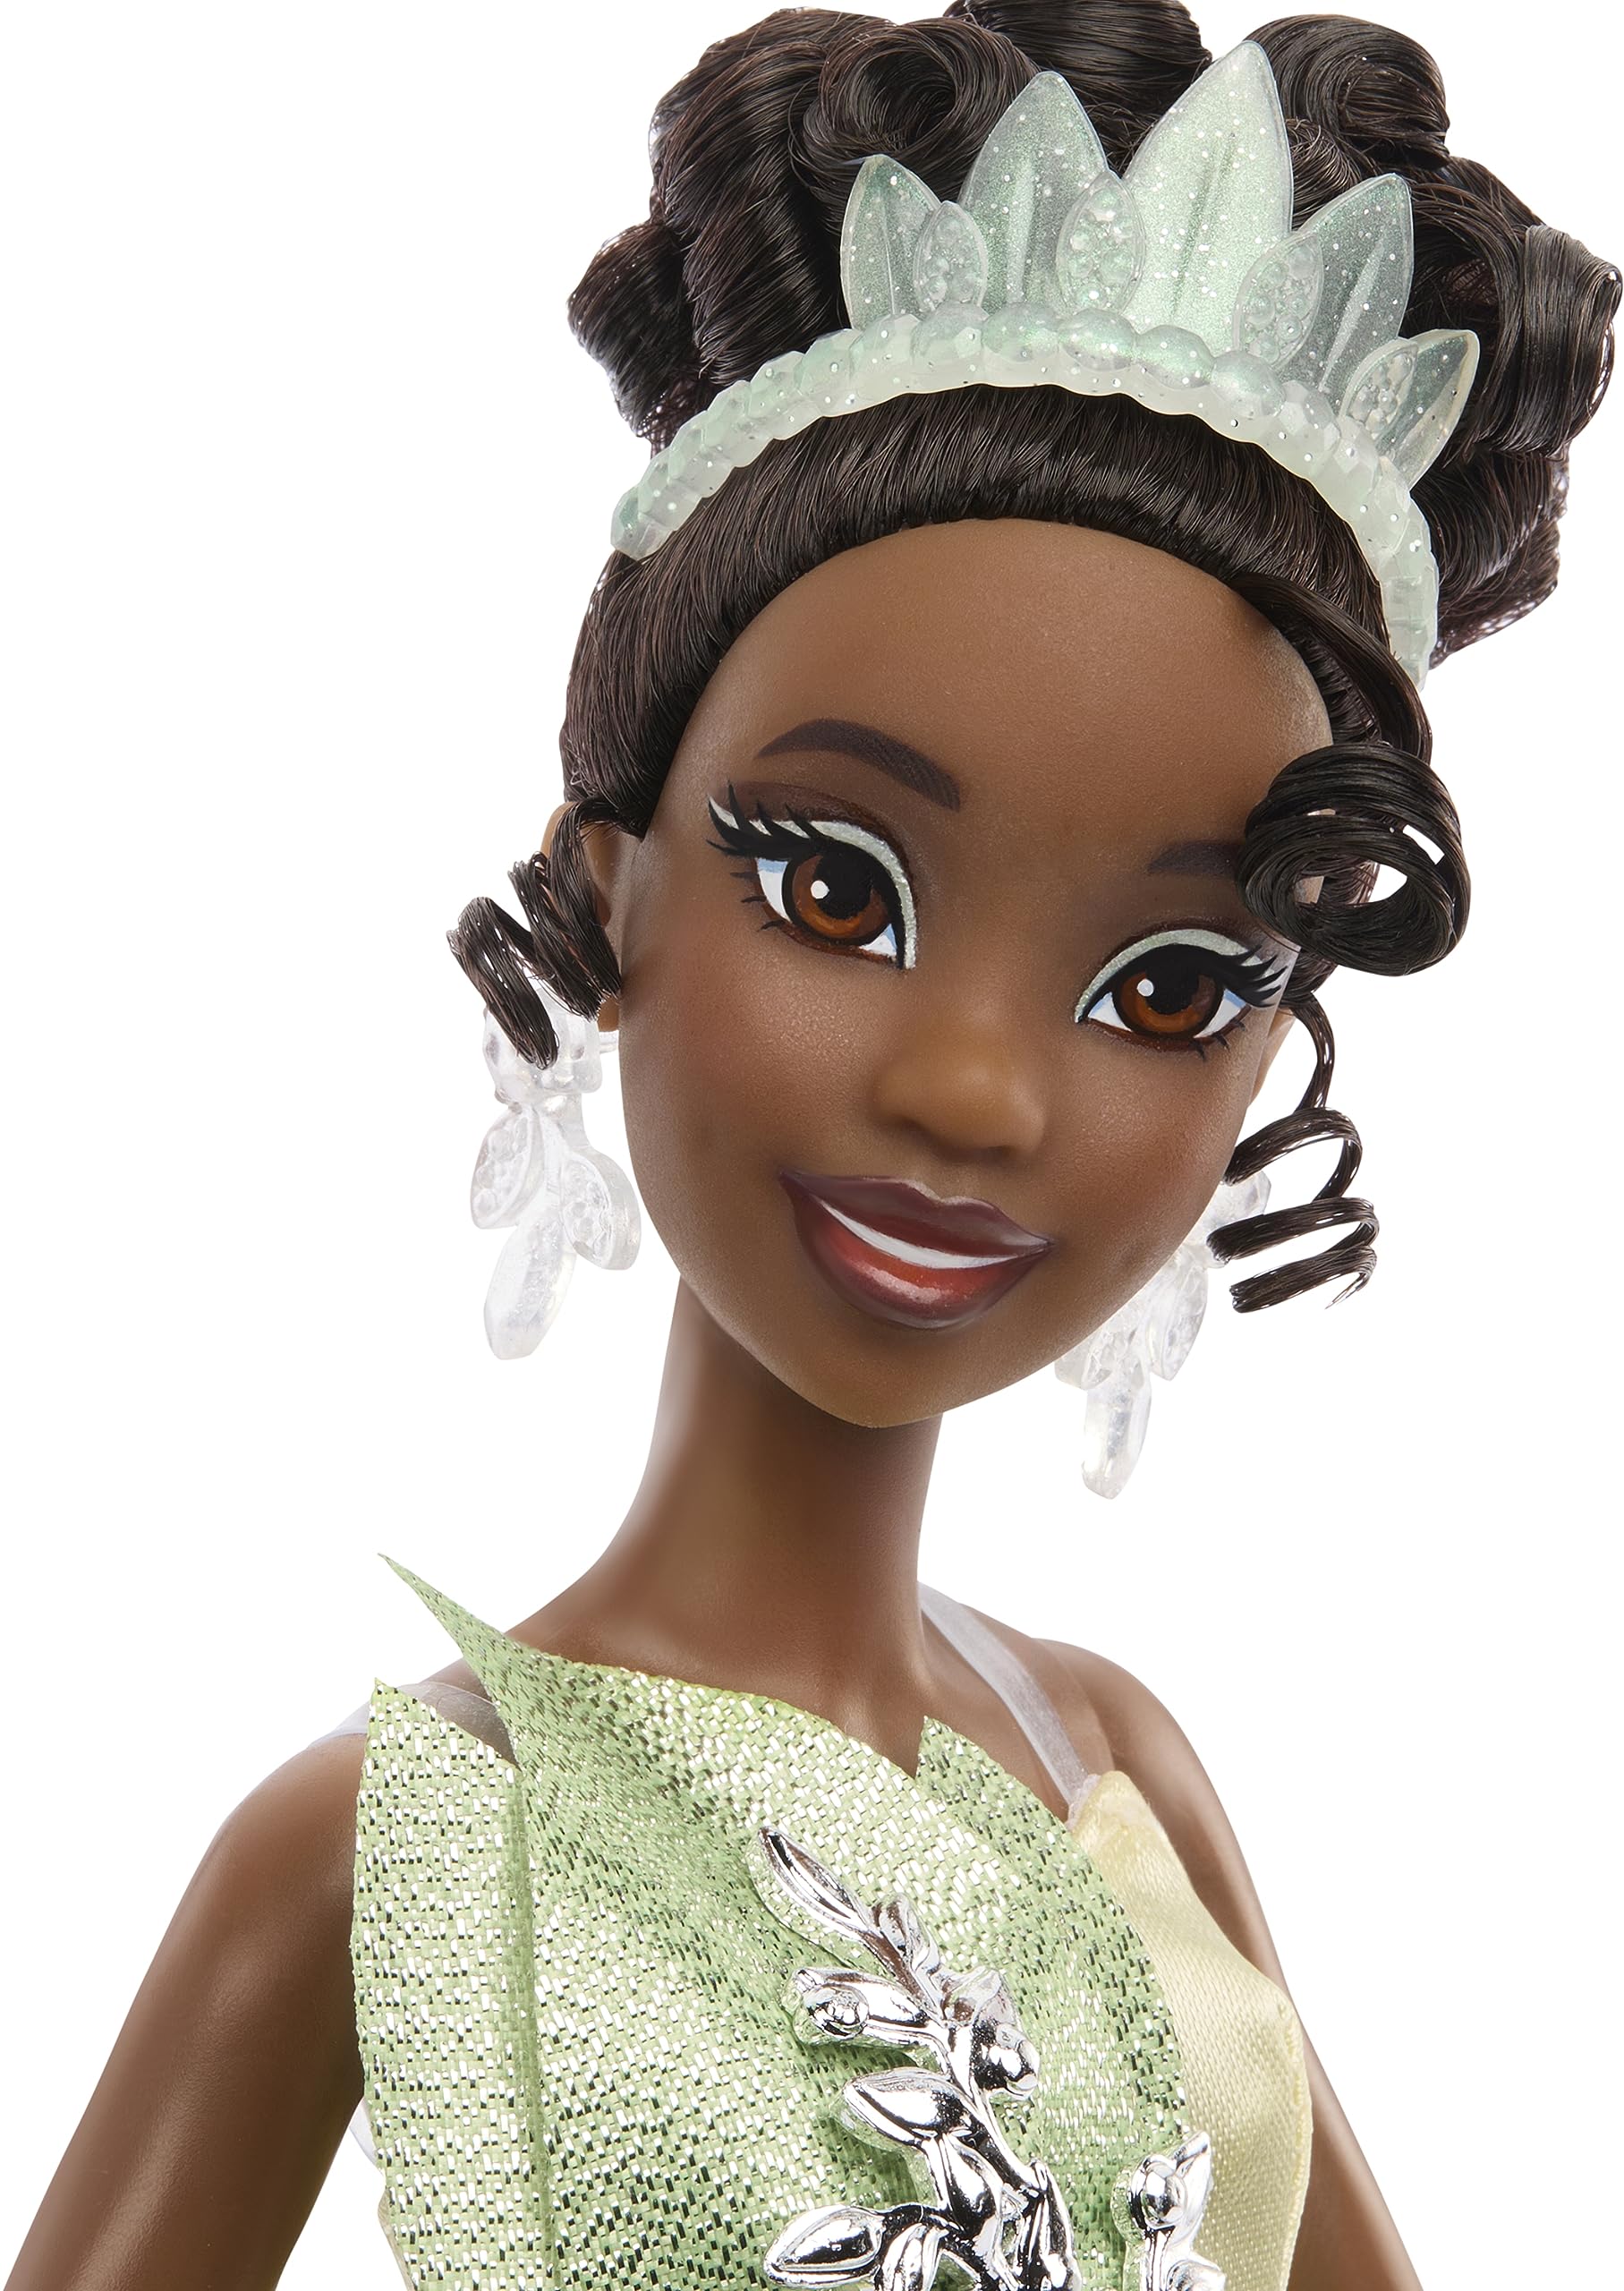 Disney Toys, Collector Tiana Doll to Celebrate Disney 100 Years of Wonder, Inspired by Disney Movie, Gifts for Kids and Collectors